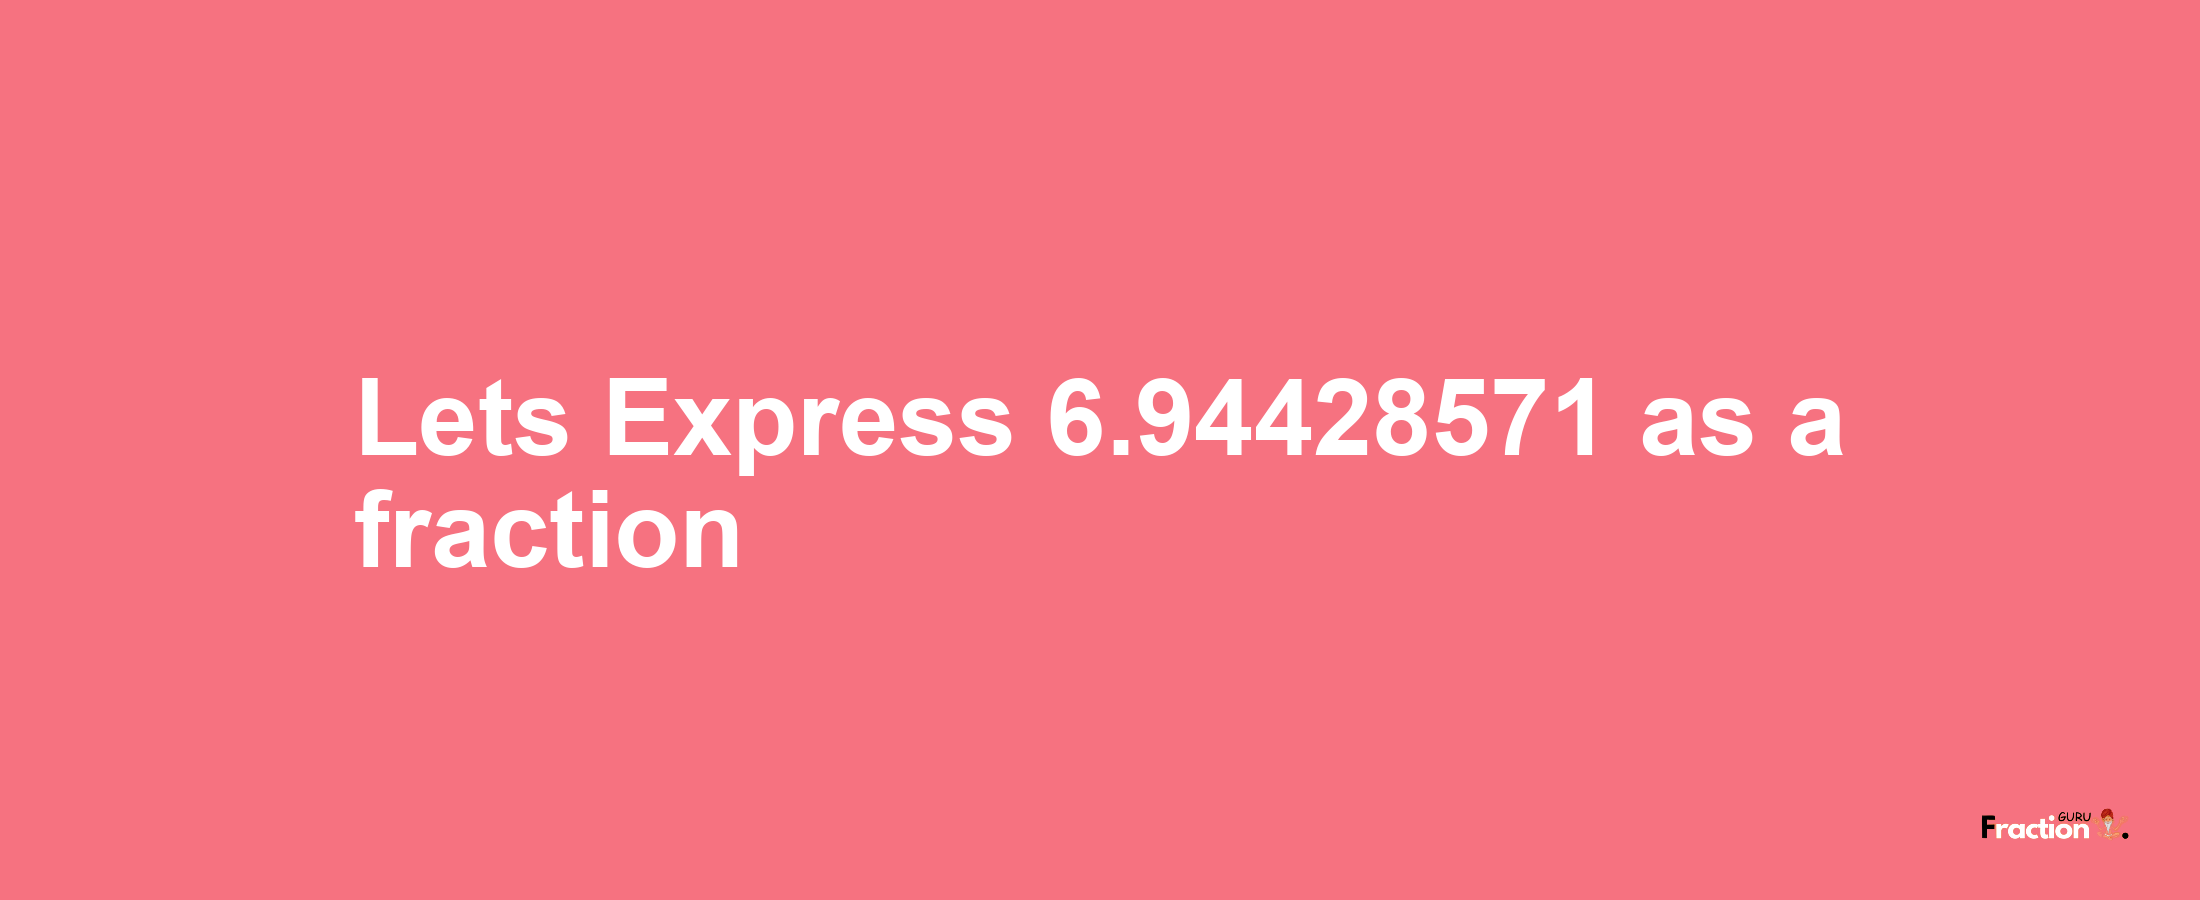 Lets Express 6.94428571 as afraction